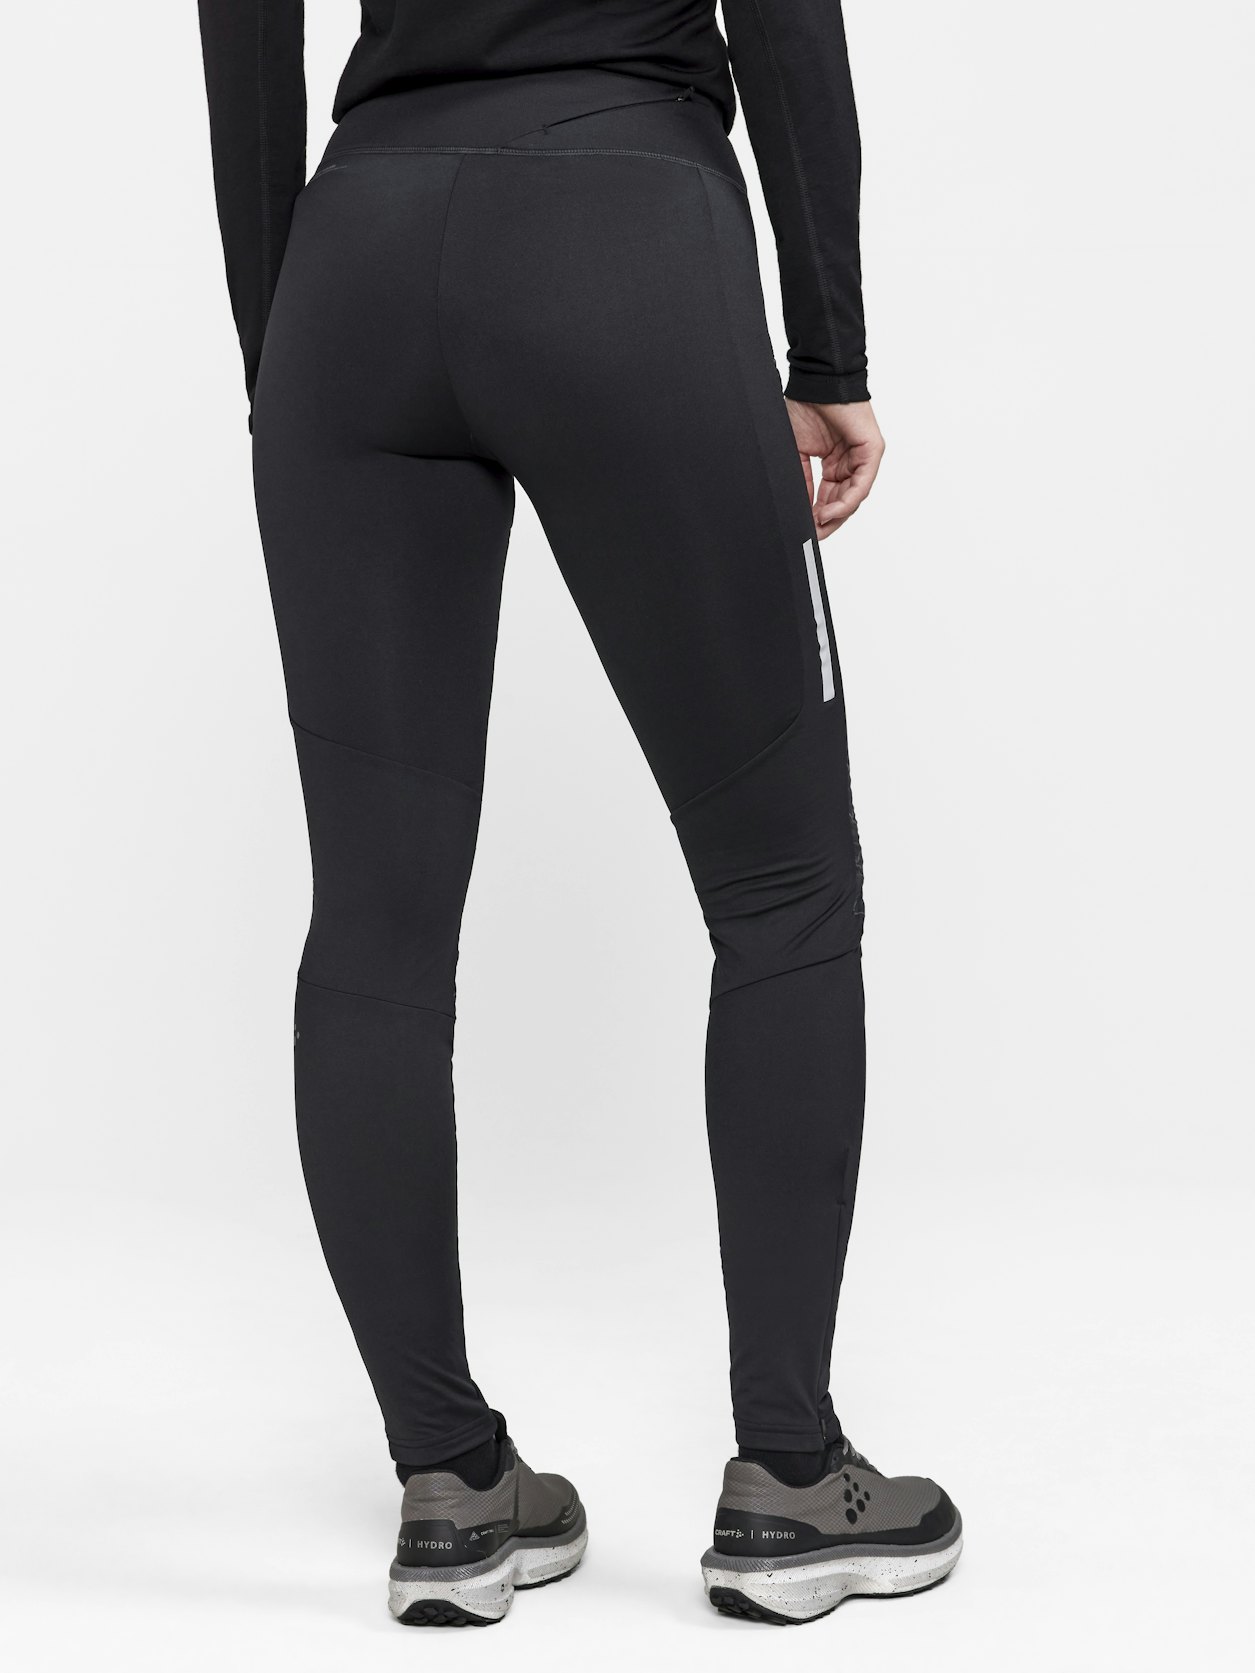 Augusta Sportswear Ladies Hyperform Compression Tight - 2630.080.XS  Compression Pants, Tights & Leggings